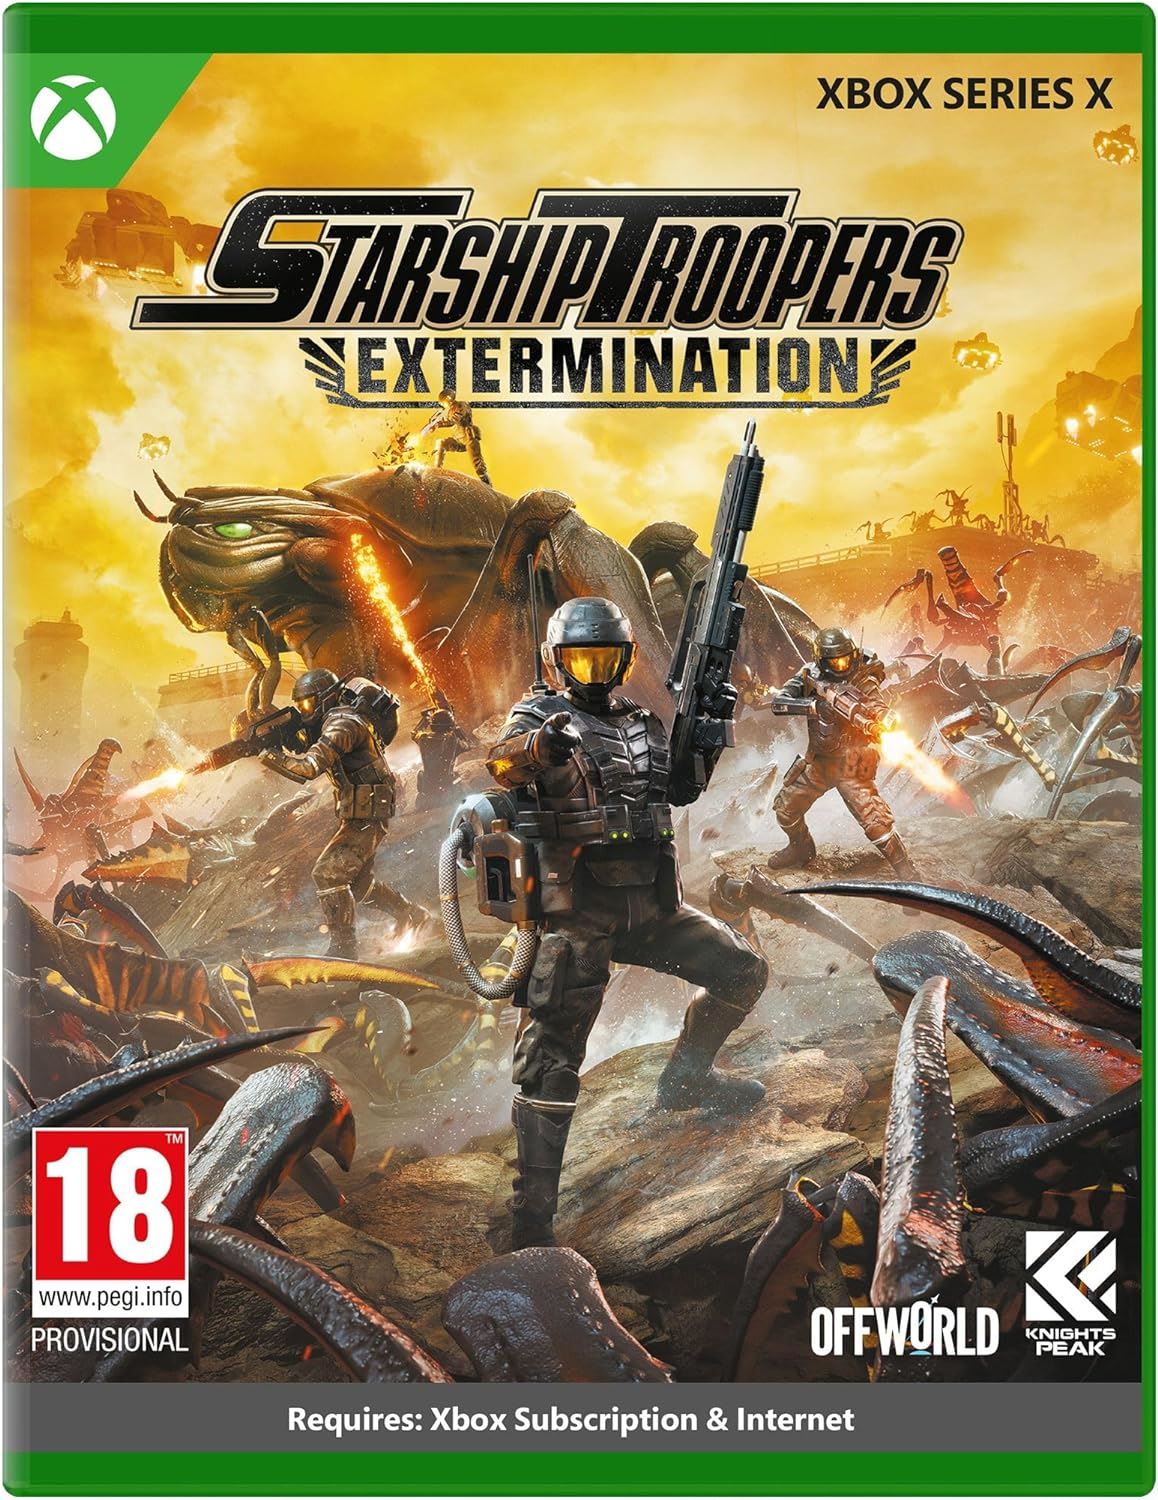 Starship Troopers Extermination Xbox Series X Game